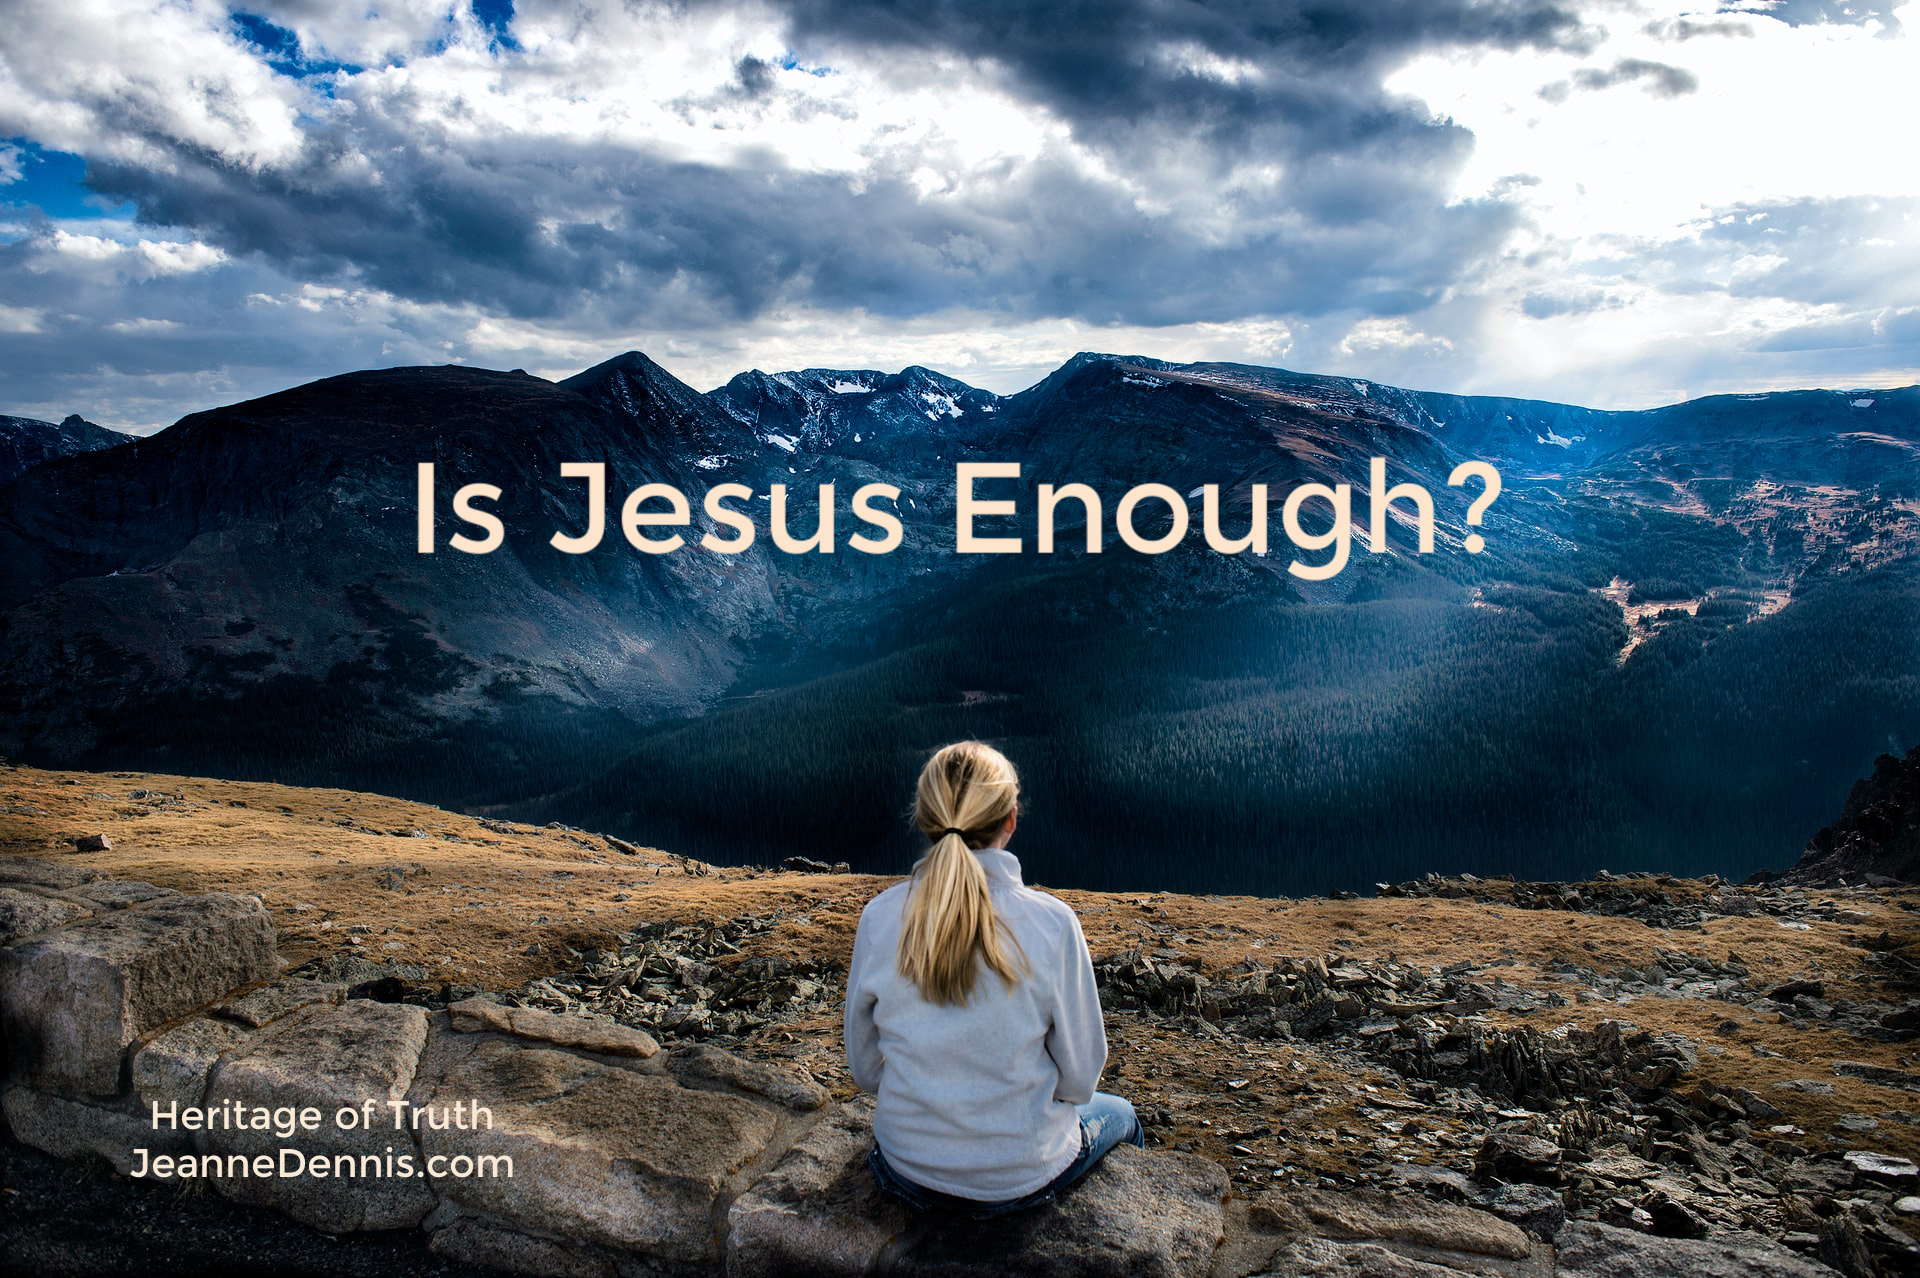 Is Jesus Enough? Heritage of Truth, JeanneDennis.com